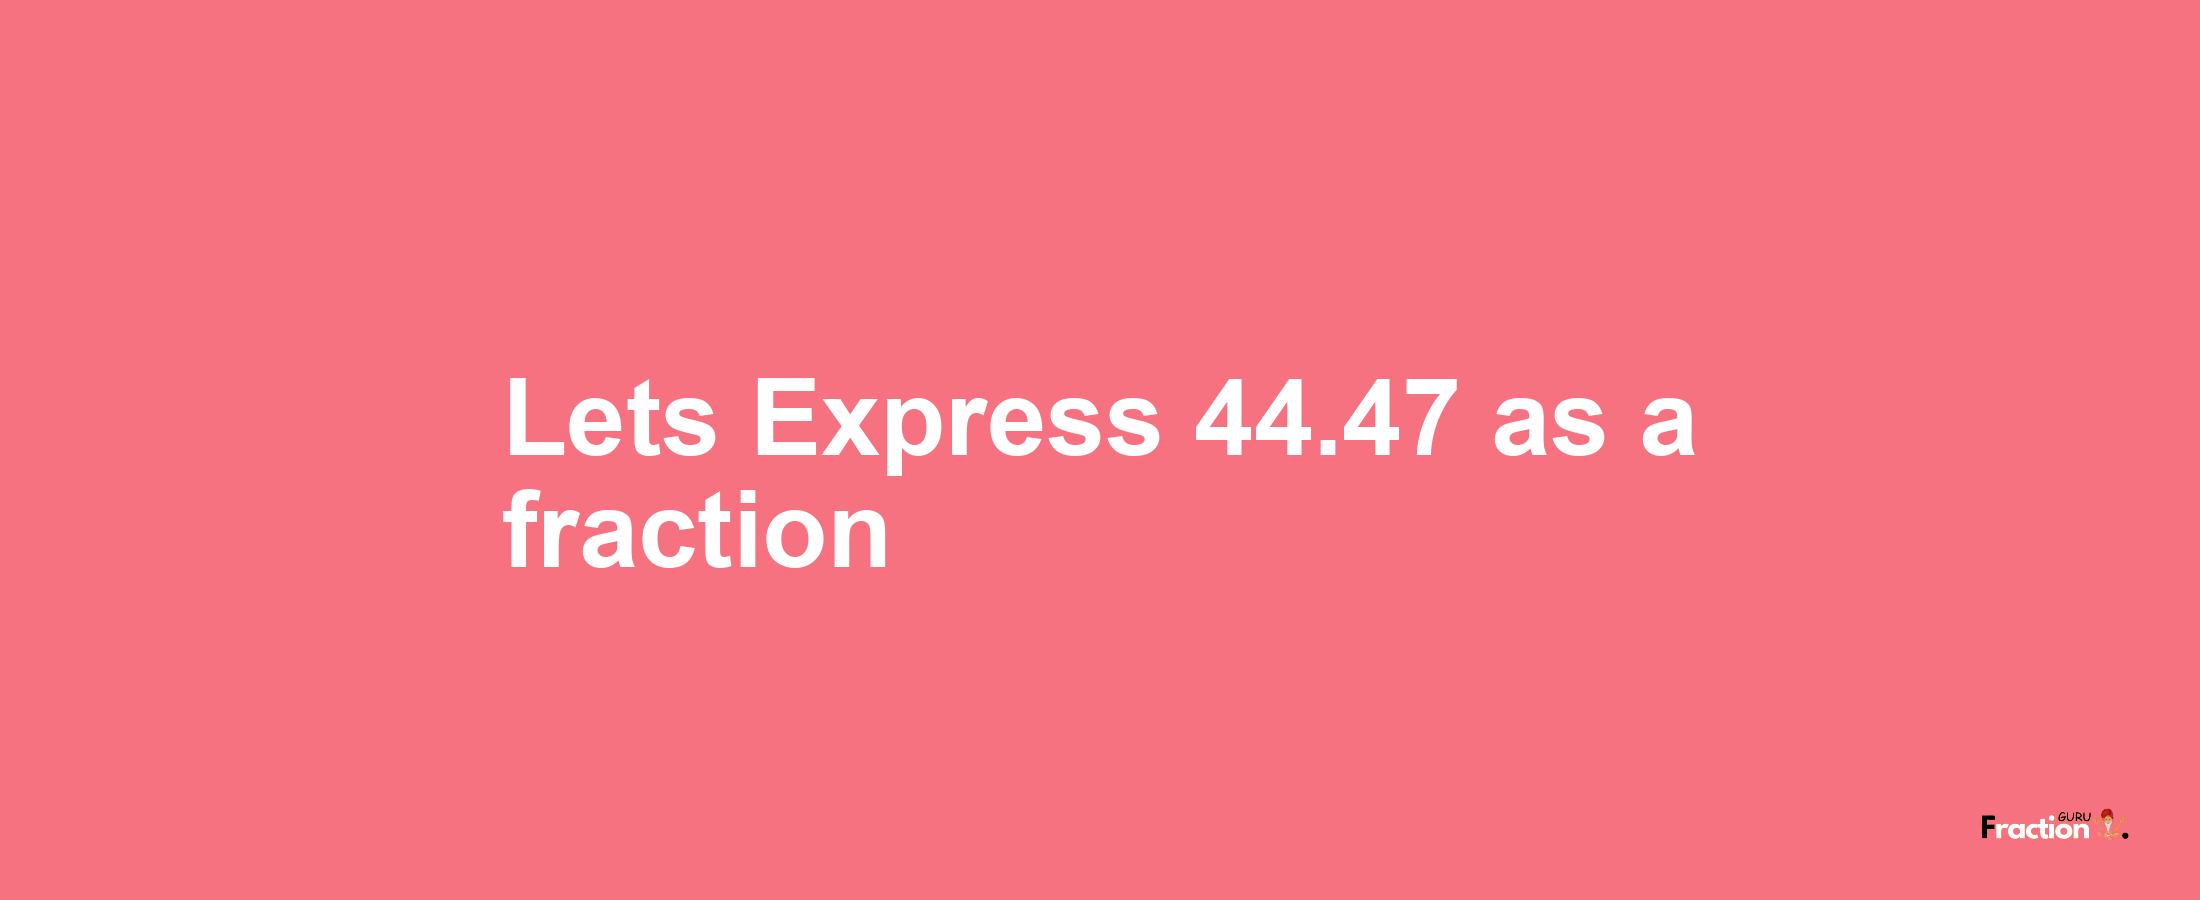 Lets Express 44.47 as afraction